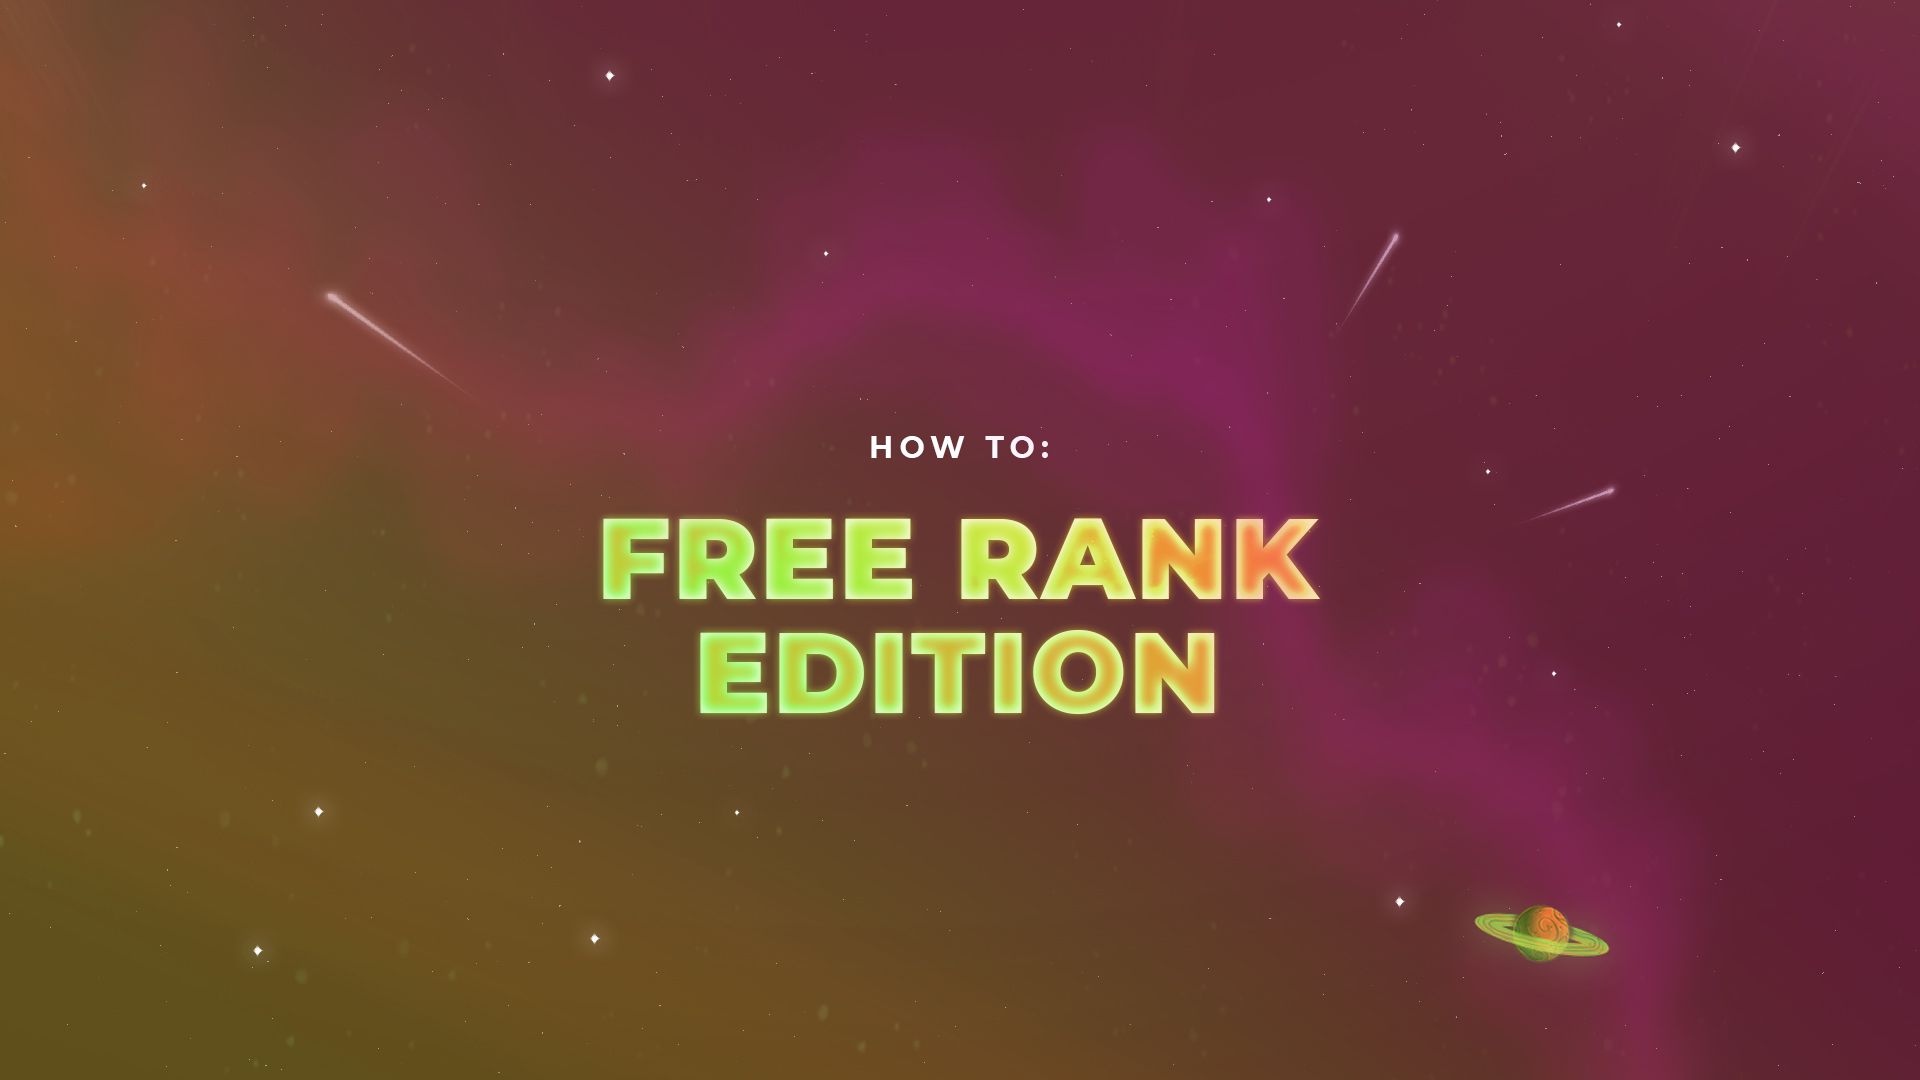 How To: Free Rank Edition